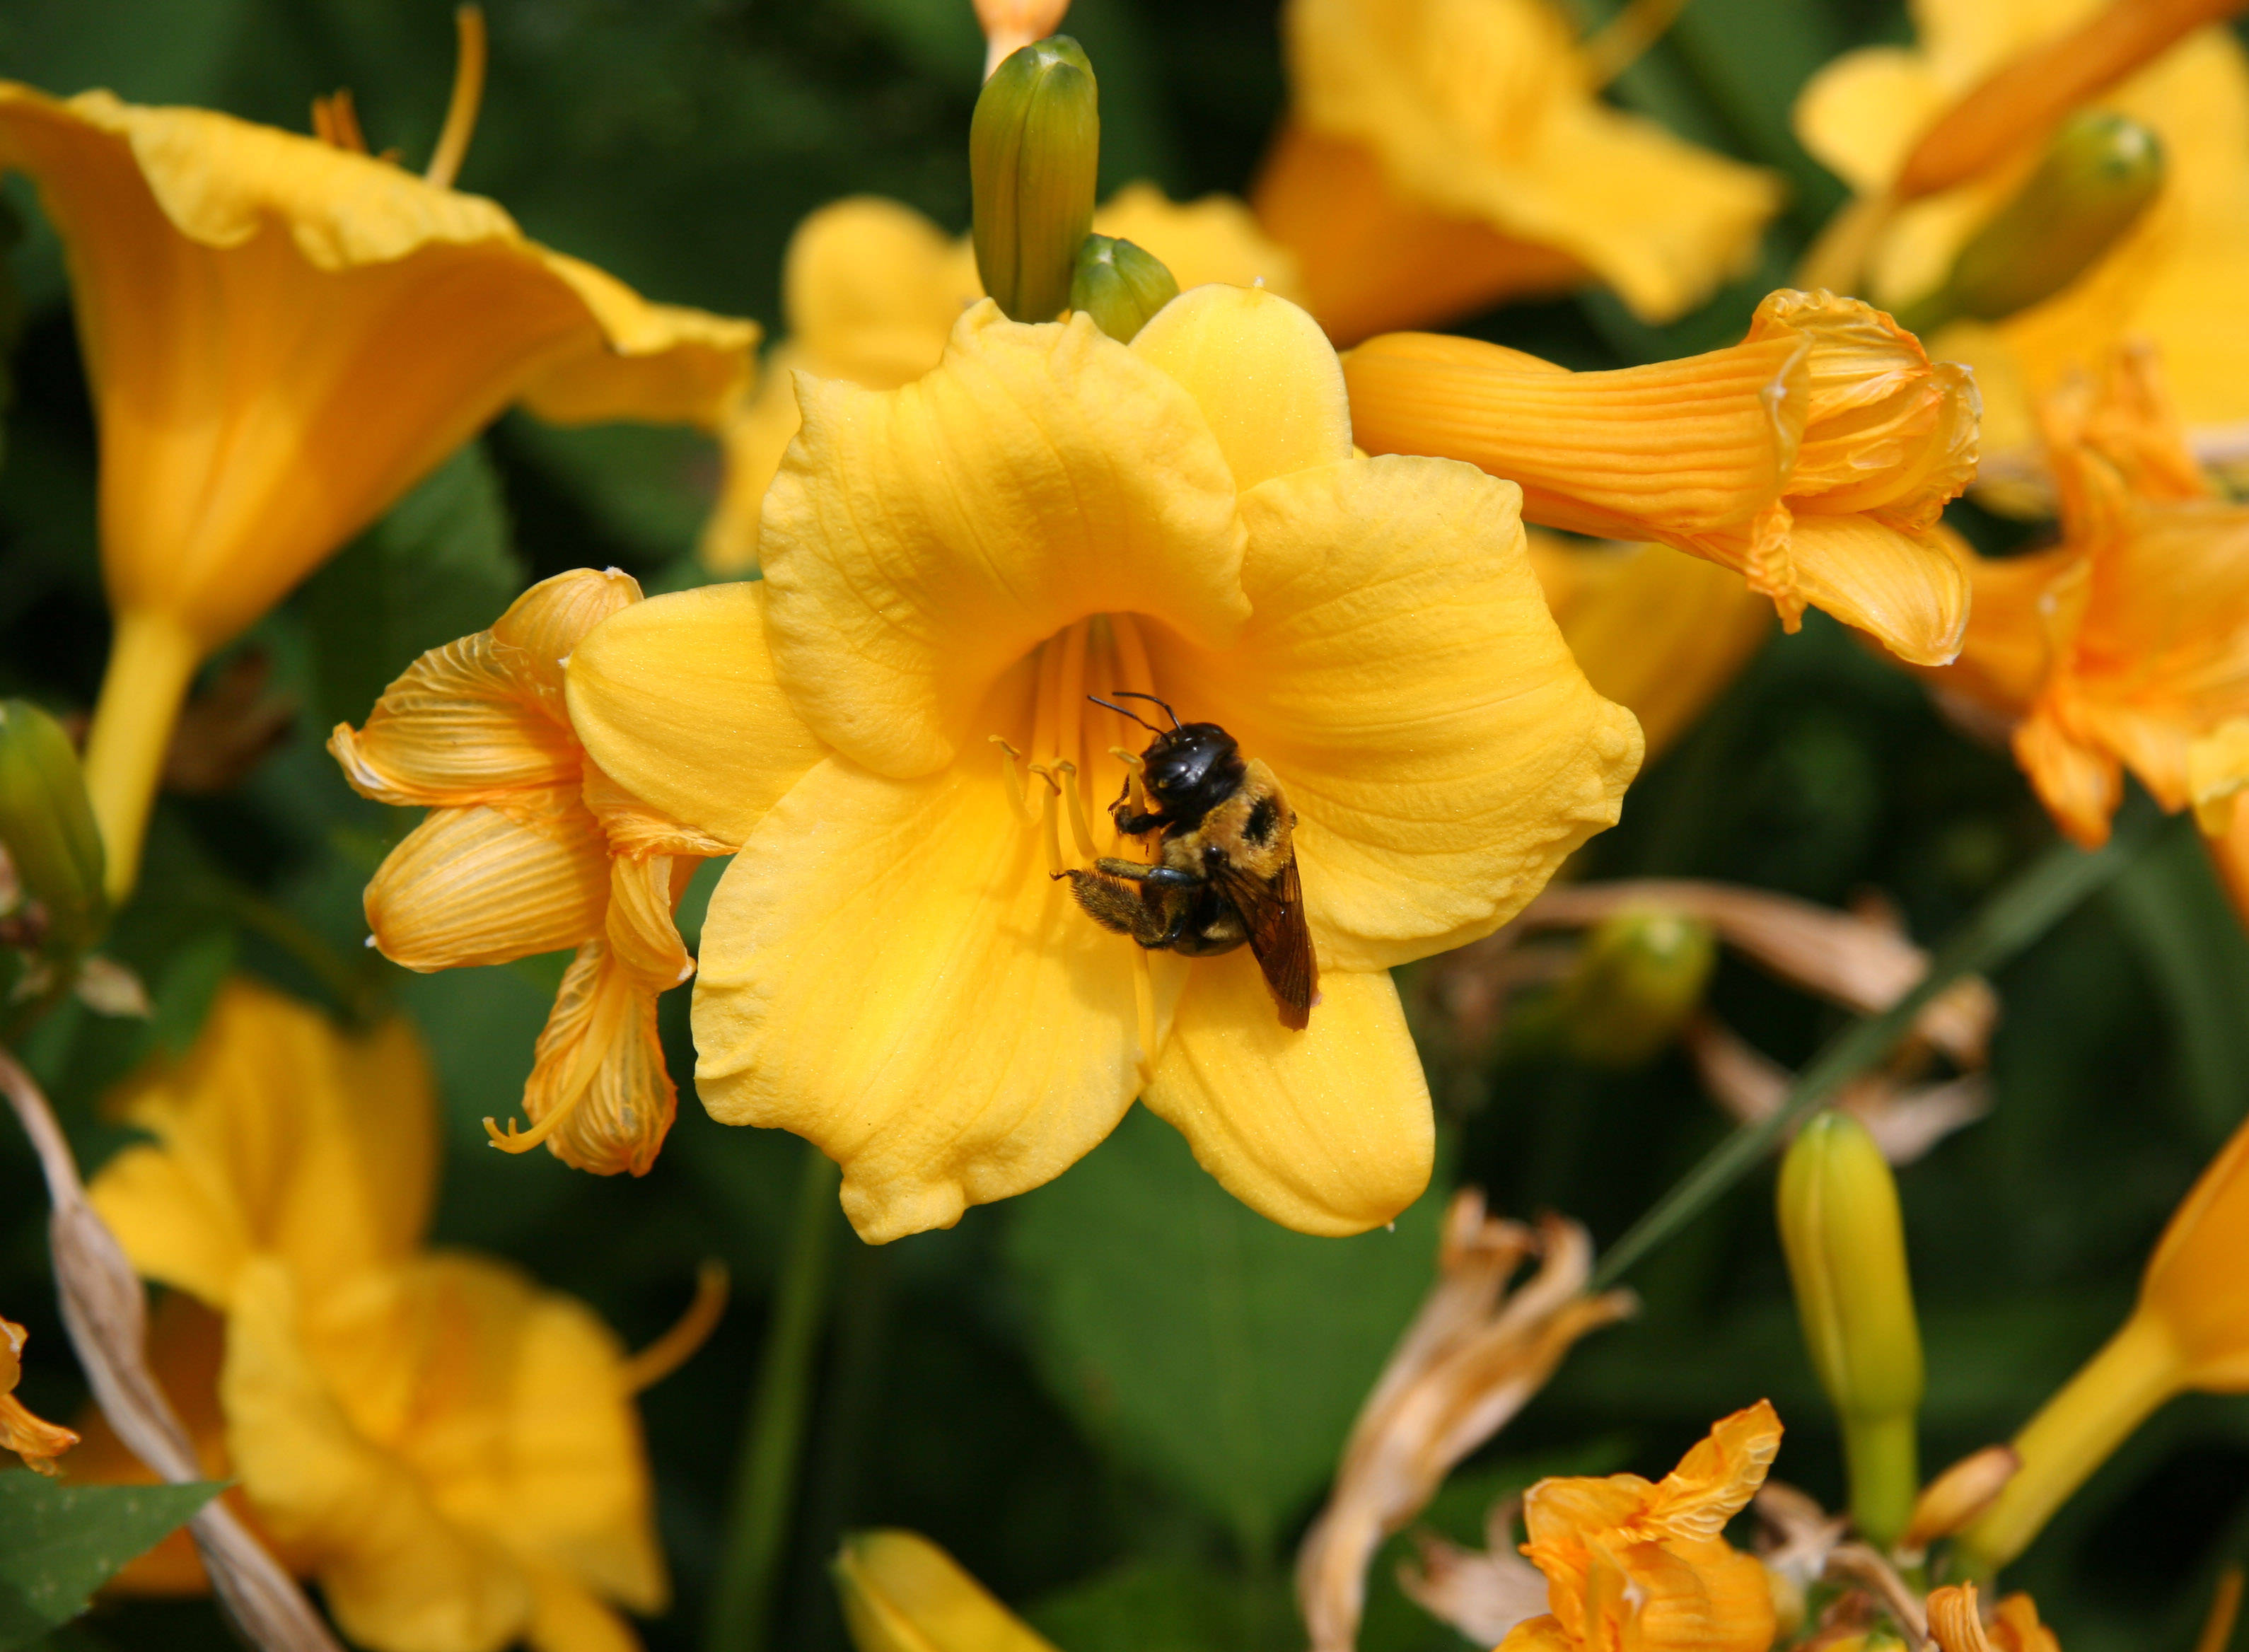 Bee in the Lilies